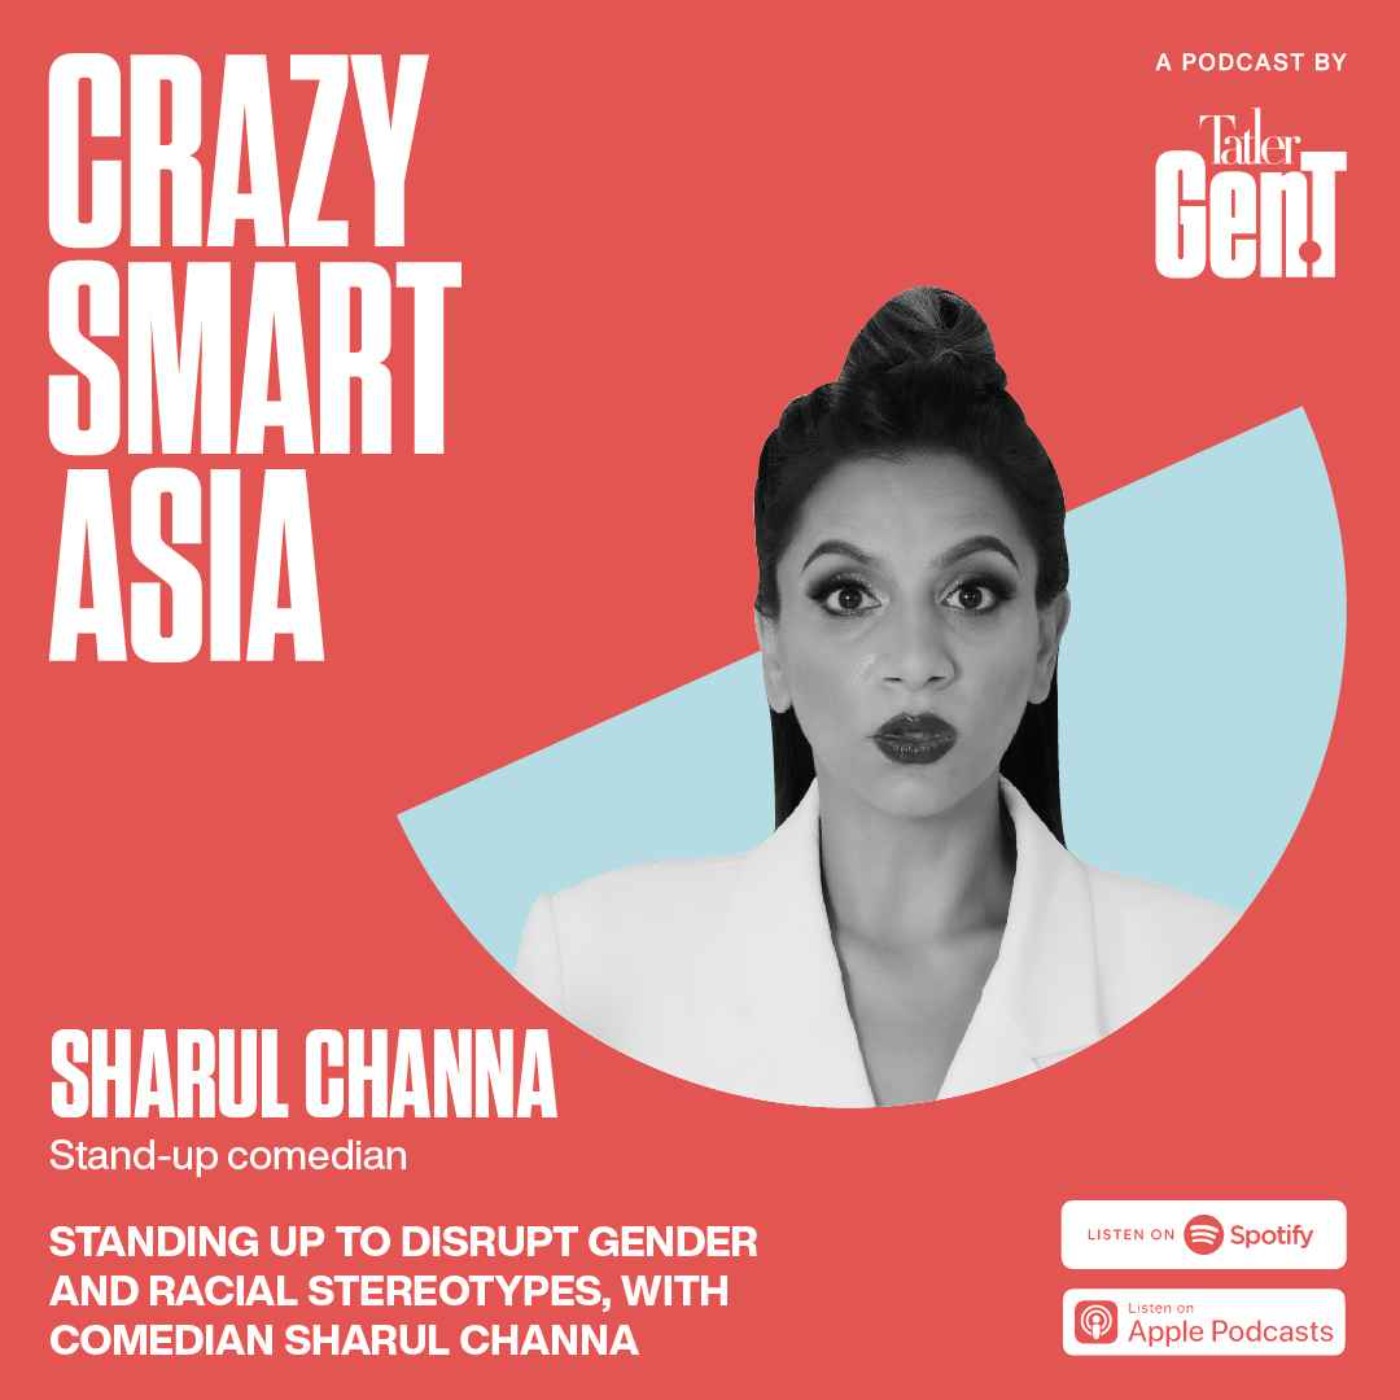 Standing up to disrupt gender and racial stereotypes, with comedian Sharul Channa